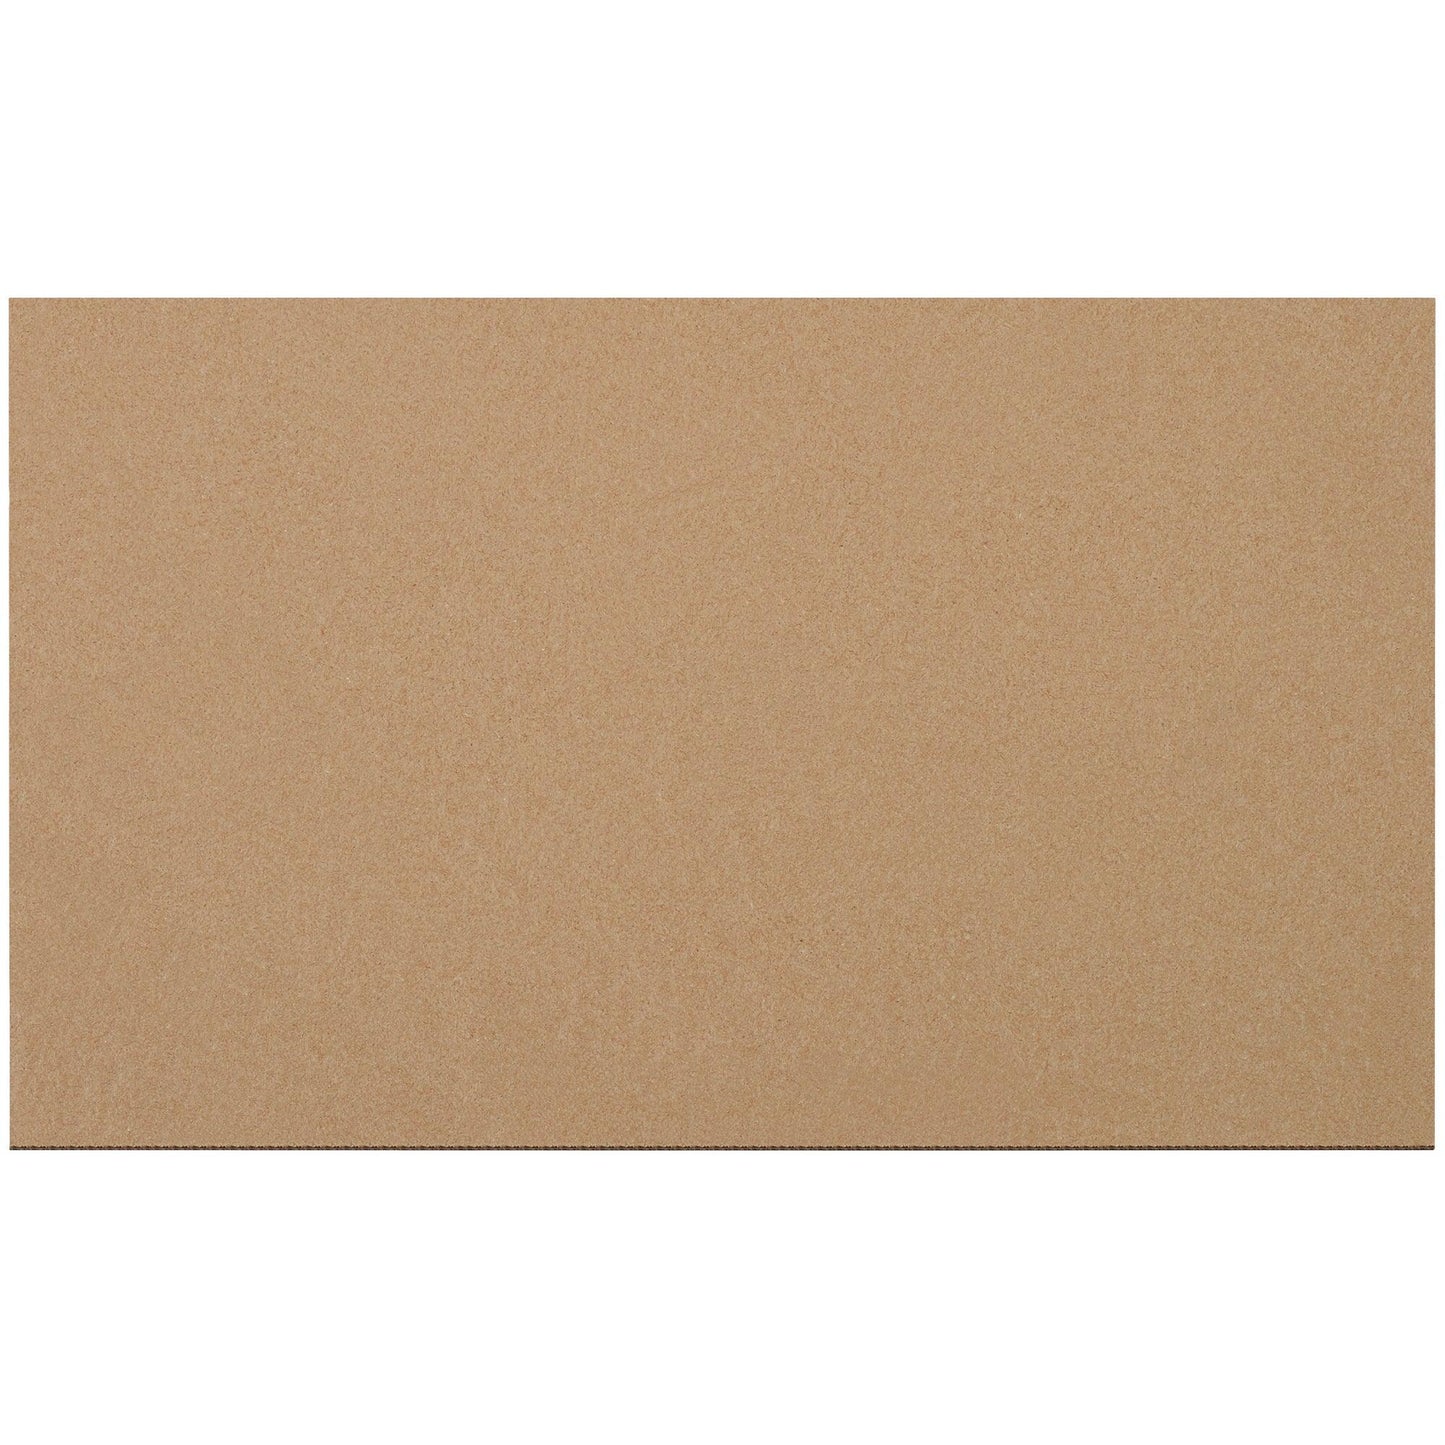 11 7/8 x 19 7/8" Corrugated Layer Pads - SP1119